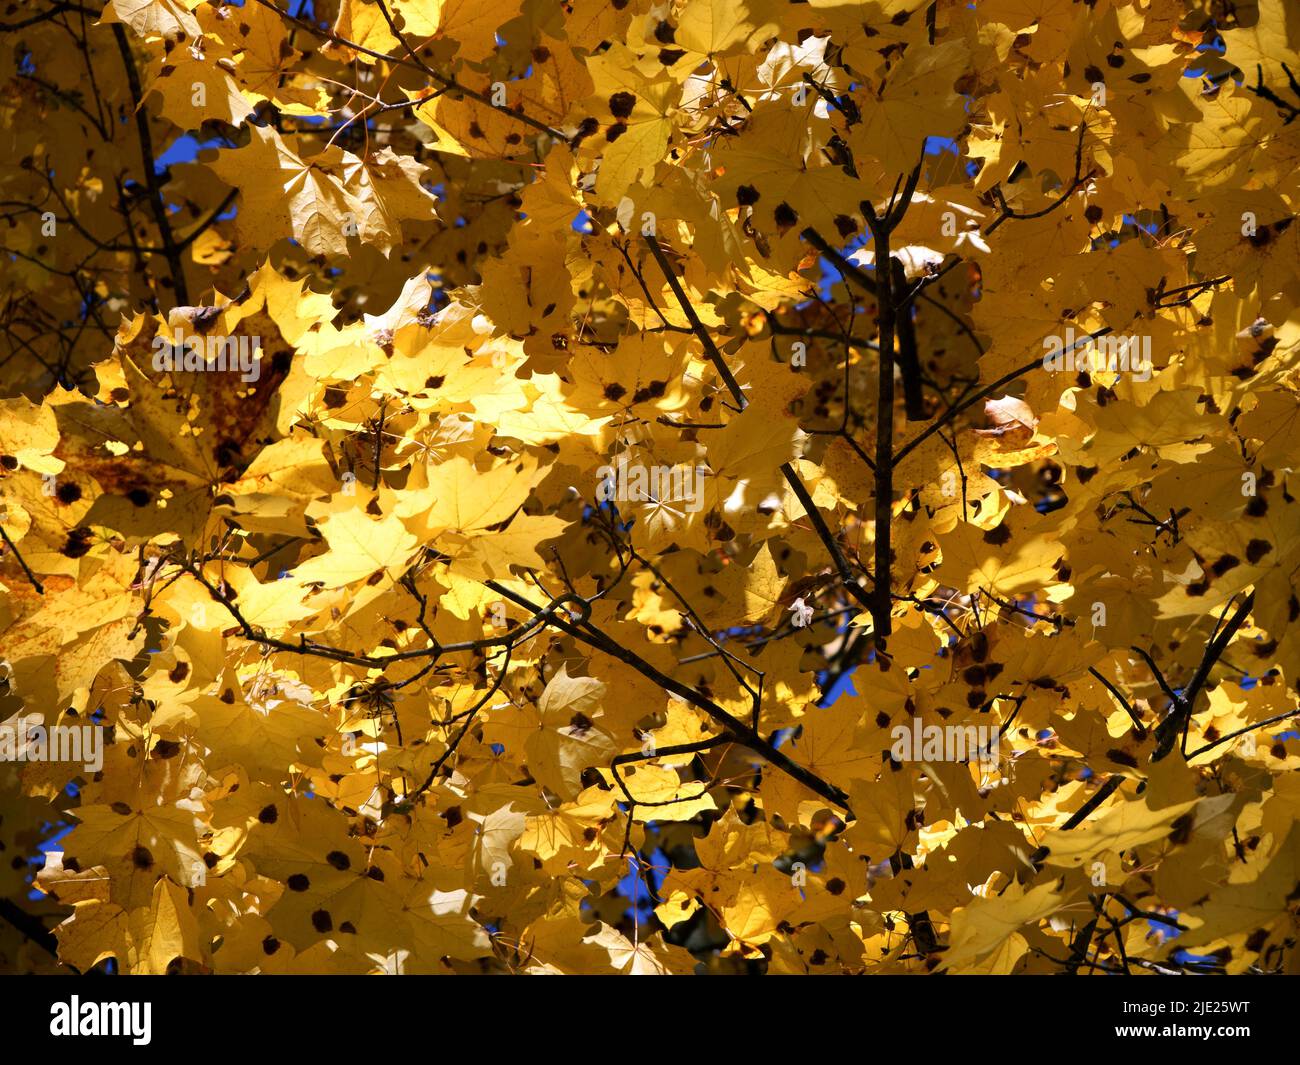 There are many golden maple leaves on the branches of the tree.  Autumn foliage. Stock Photo